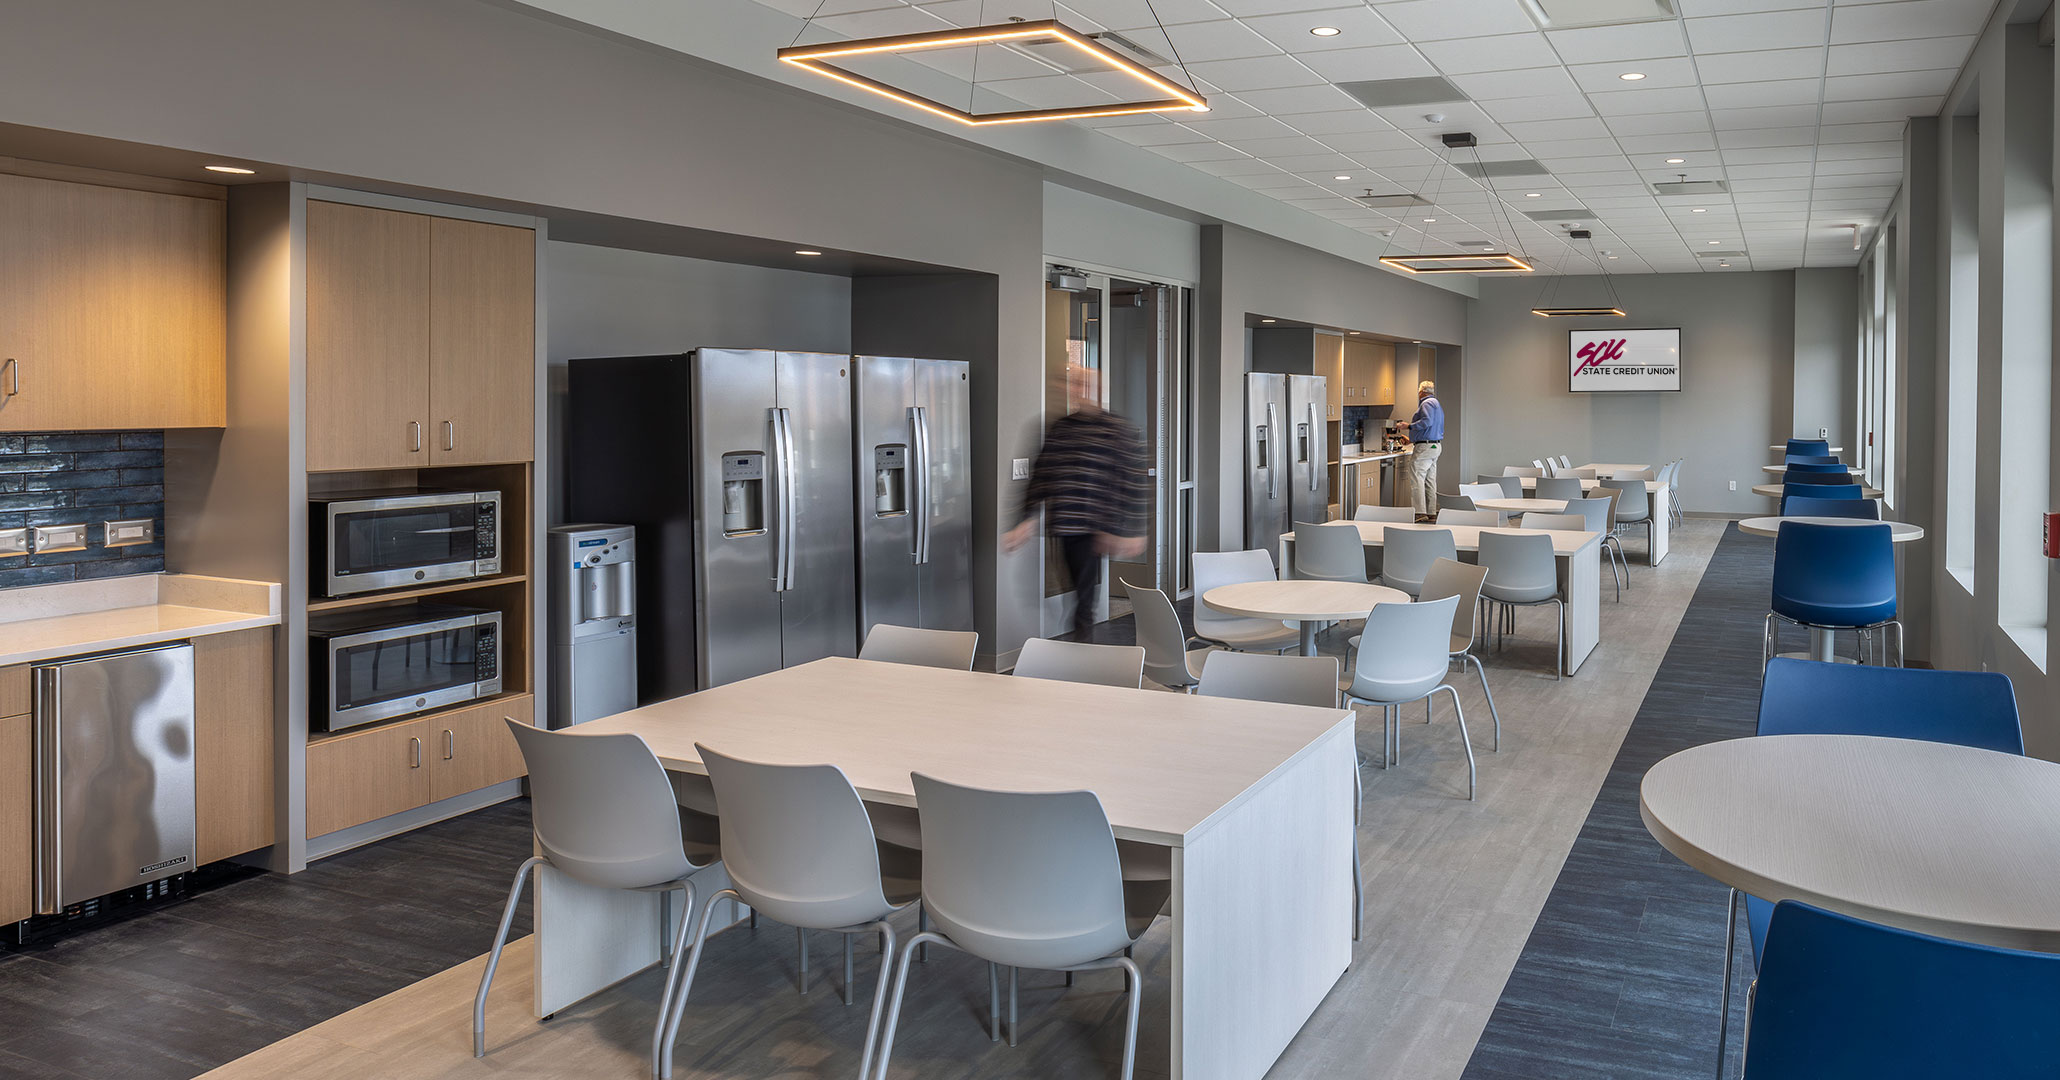 The breakrooms at SCU’s new headquarters are full of amenities for workers.